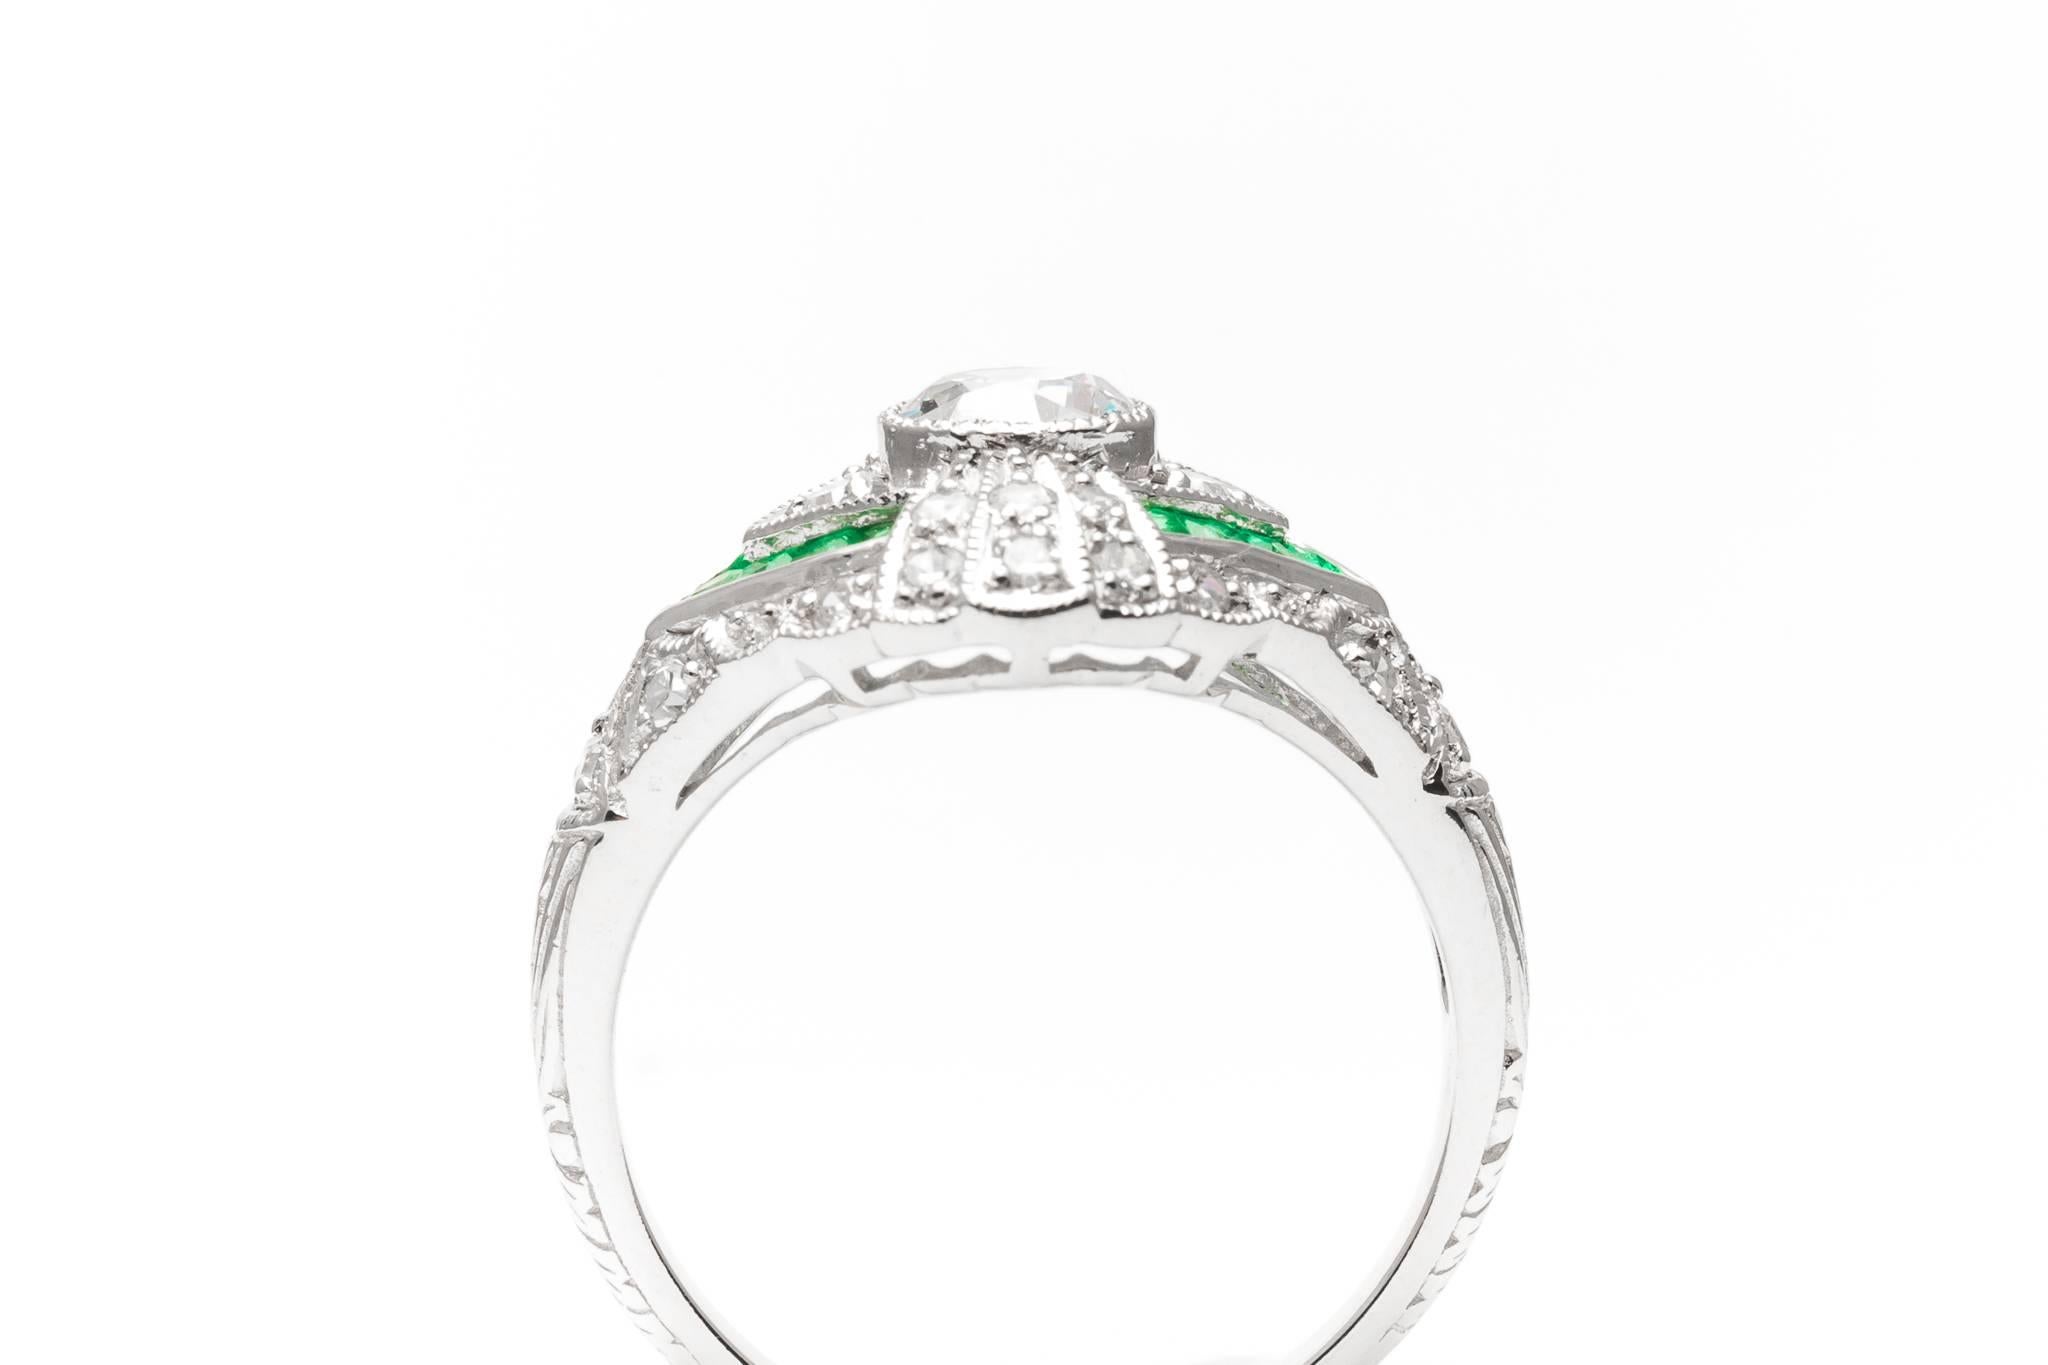 Vibrant French Cut Emerald Diamond White Gold Ring  For Sale 1